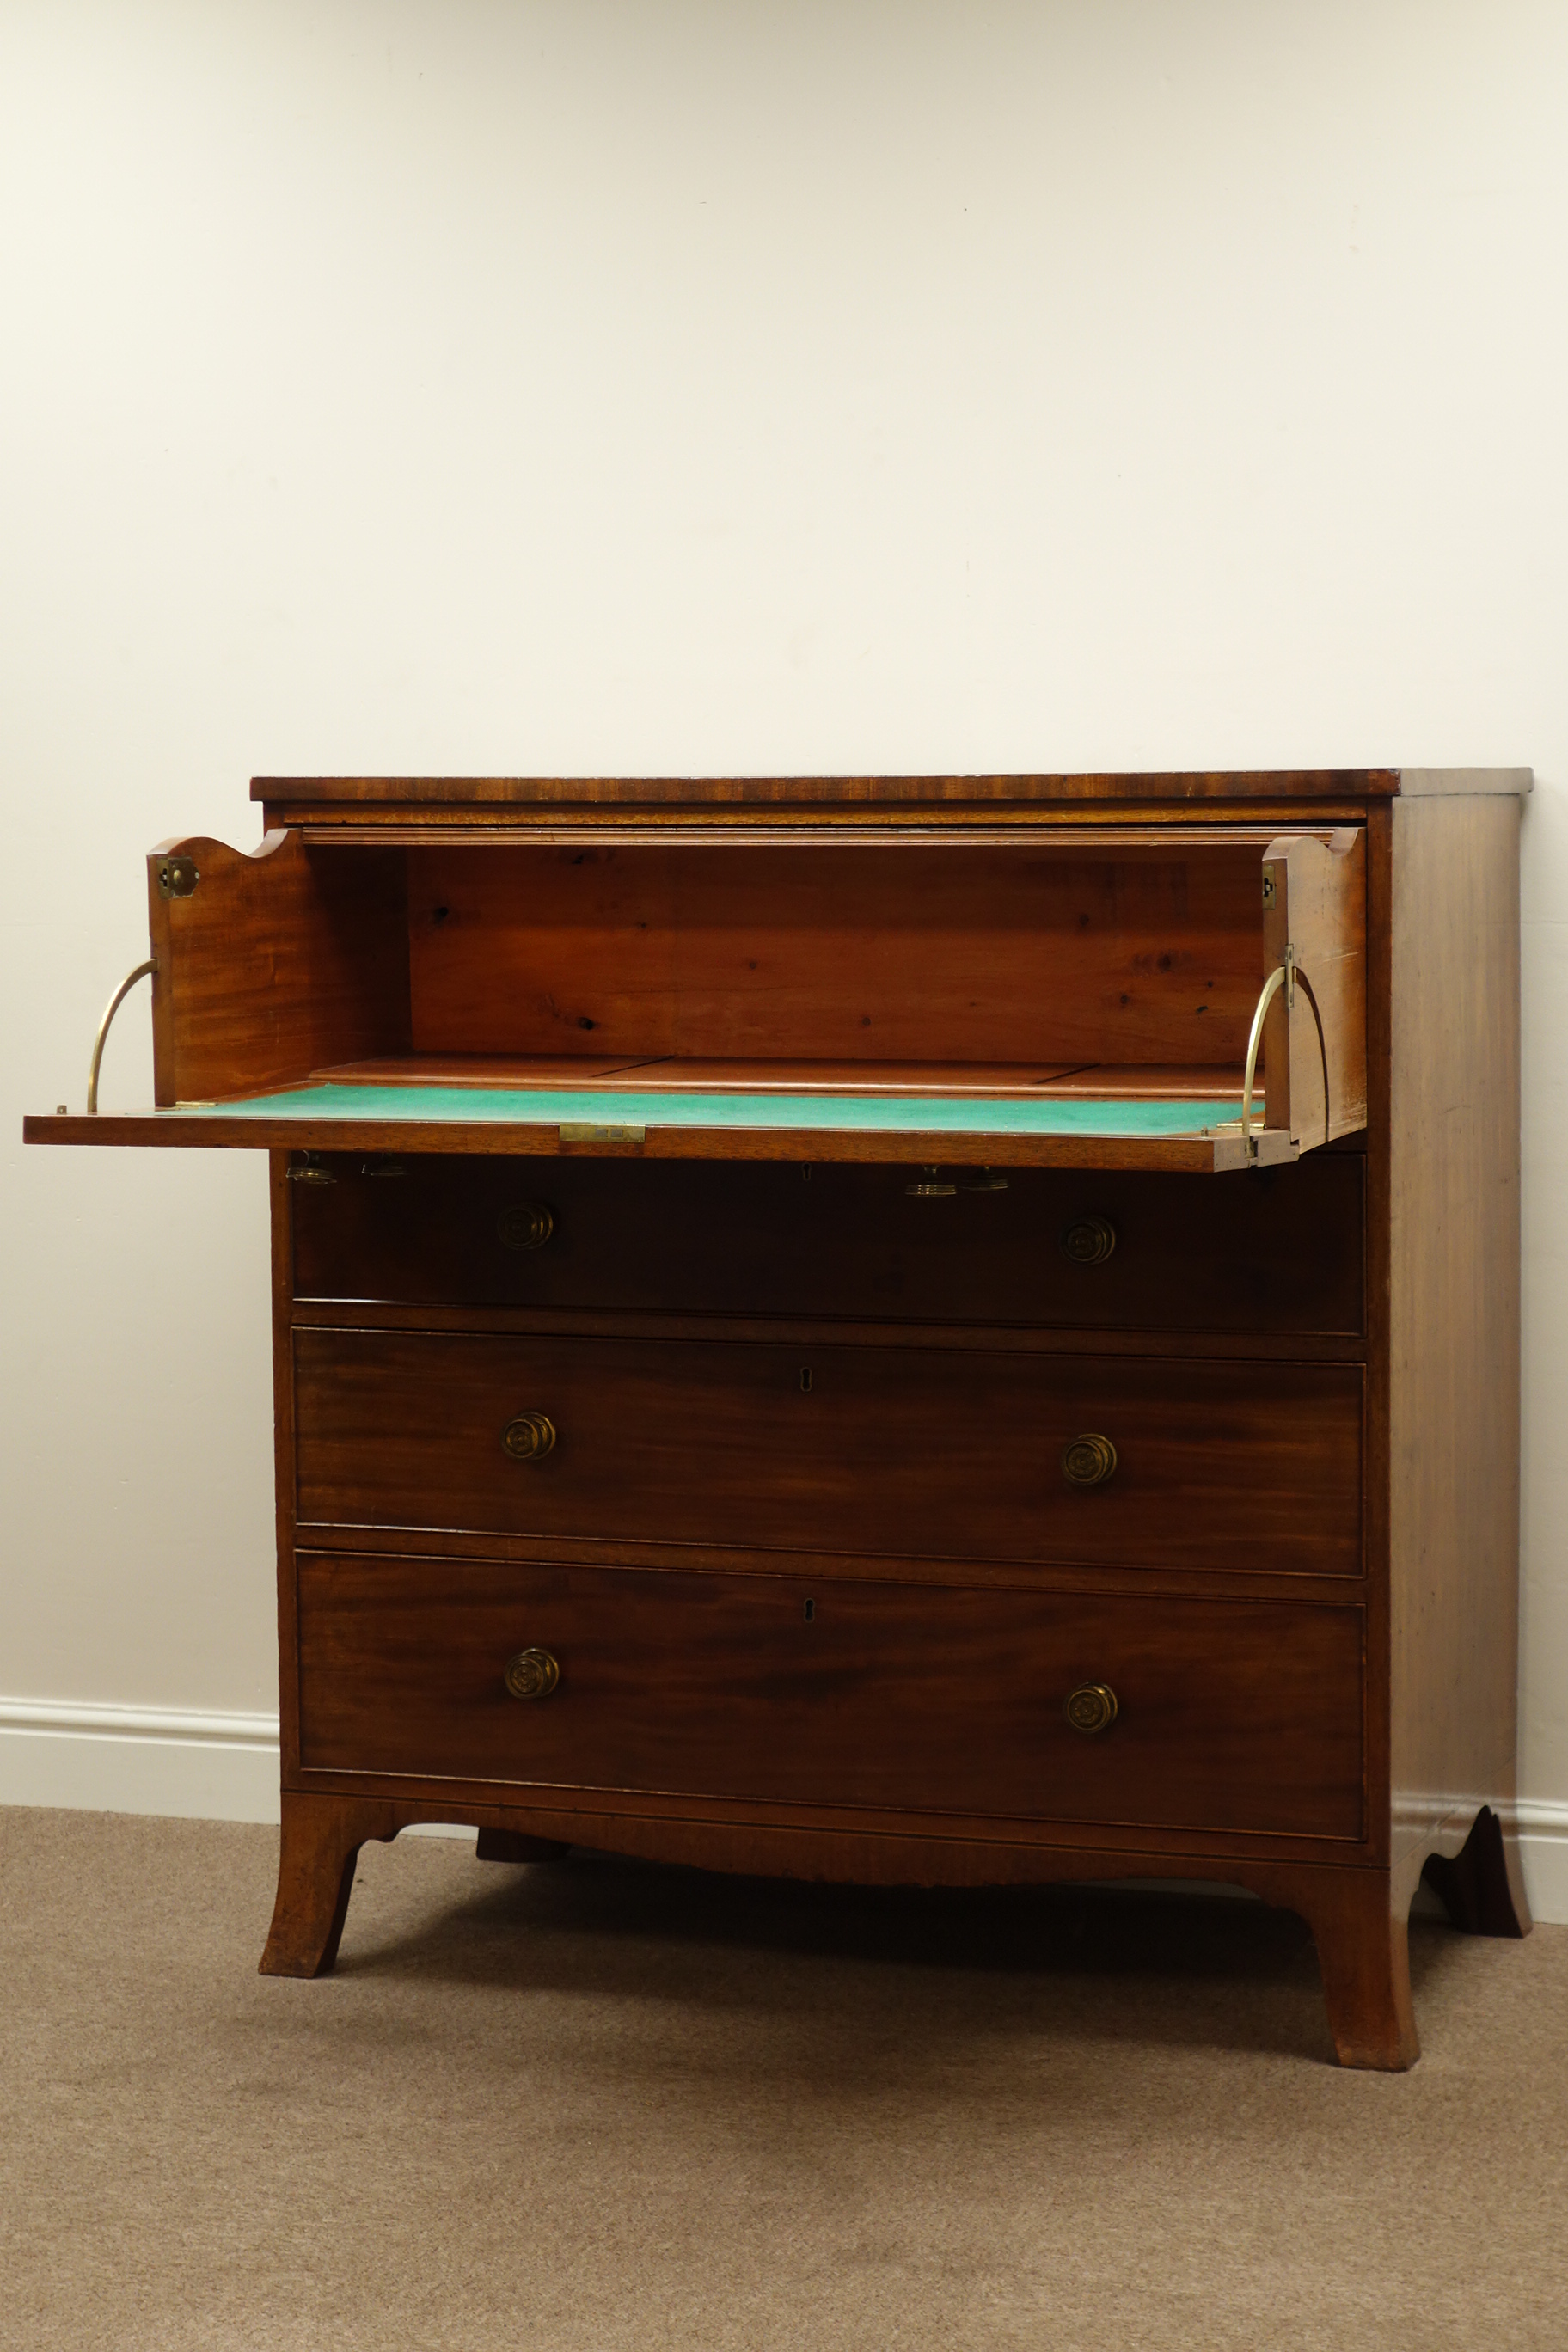 Early 19th century mahogany secretaire chest, fall front drawer with baize lined interior, - Image 2 of 2